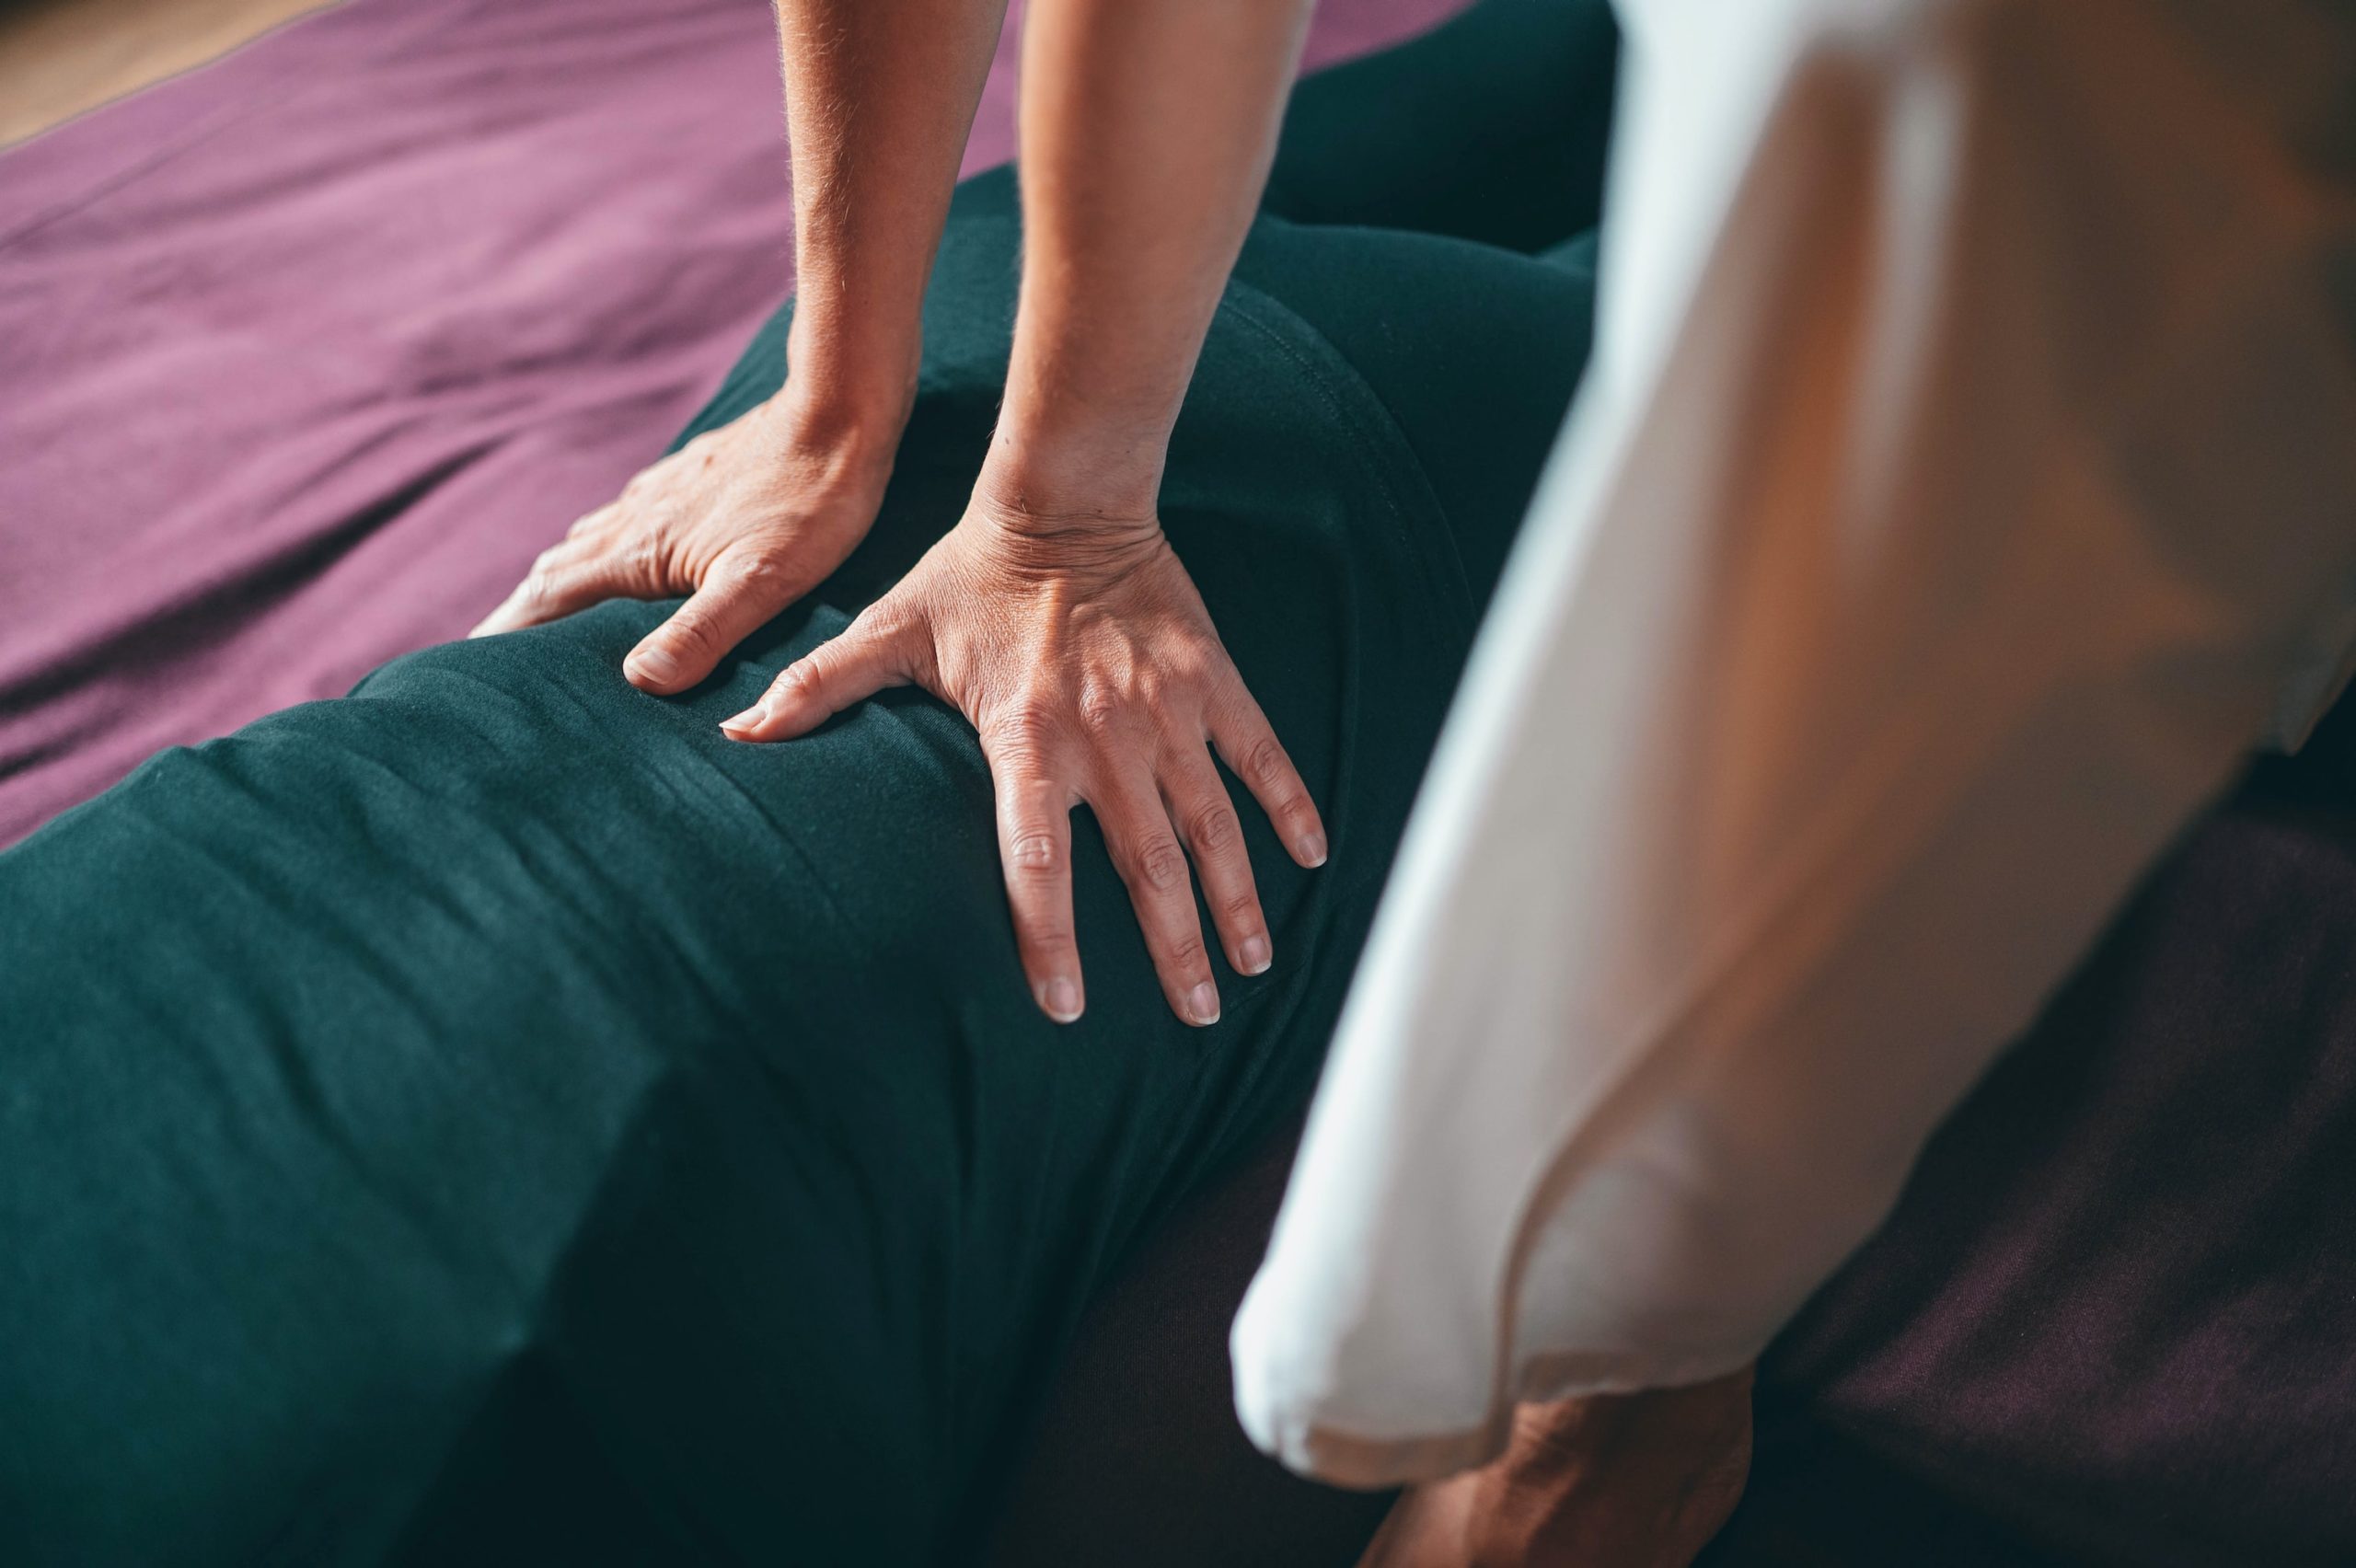 Therapeutic massage at Maintain Yourself PDX Massage